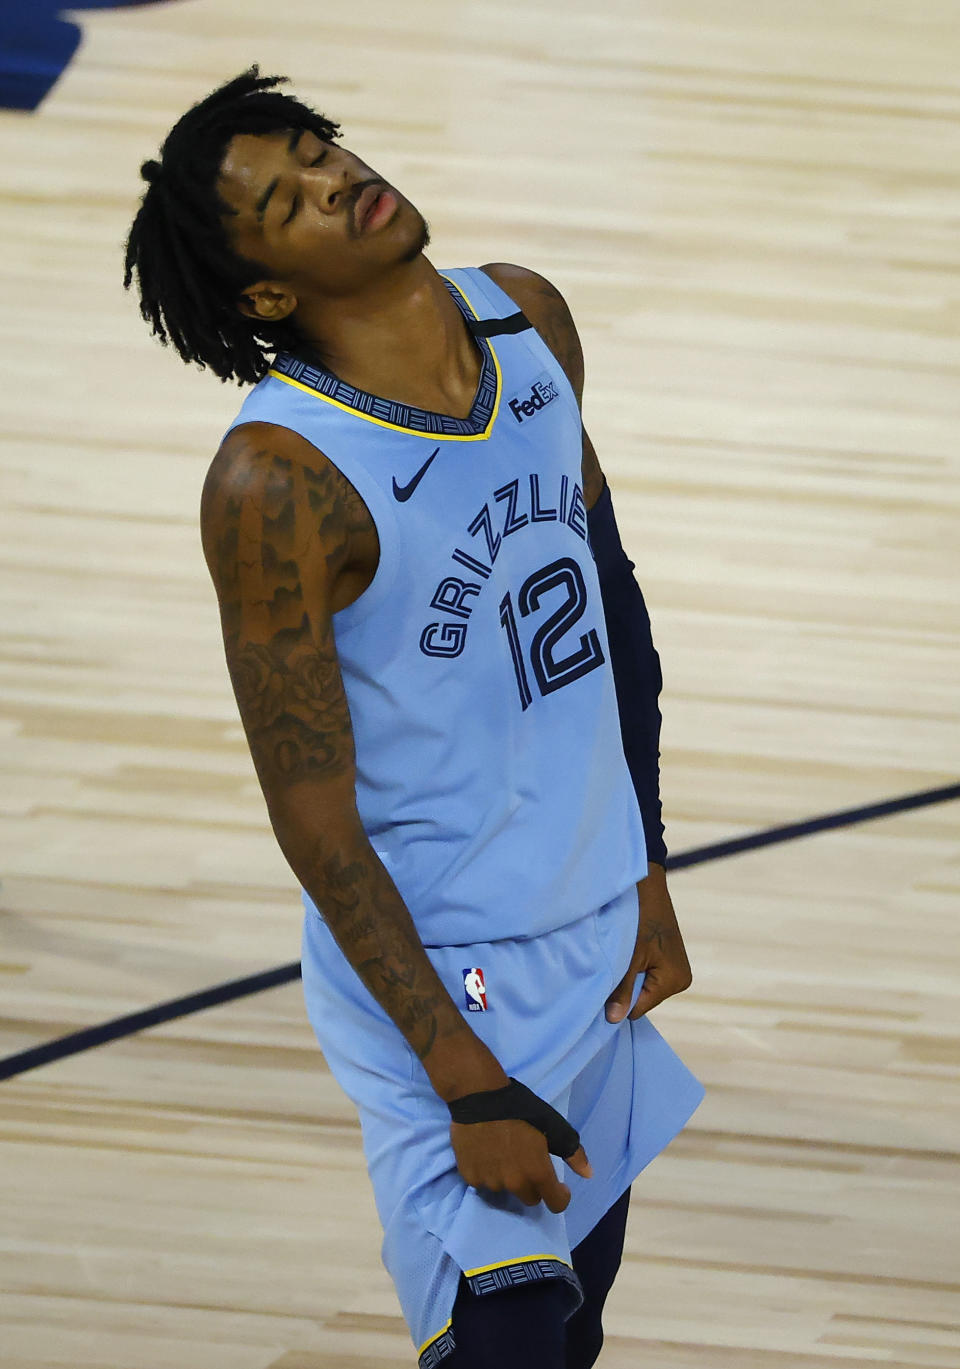 Memphis Grizzlies' Ja Morant reacts after a losing to the Portland Trail Blazers in an NBA basketball game Saturday, Aug. 15, 2020, in Lake Buena Vista, Fla. (Kevin C. Cox/Pool Photo via AP)